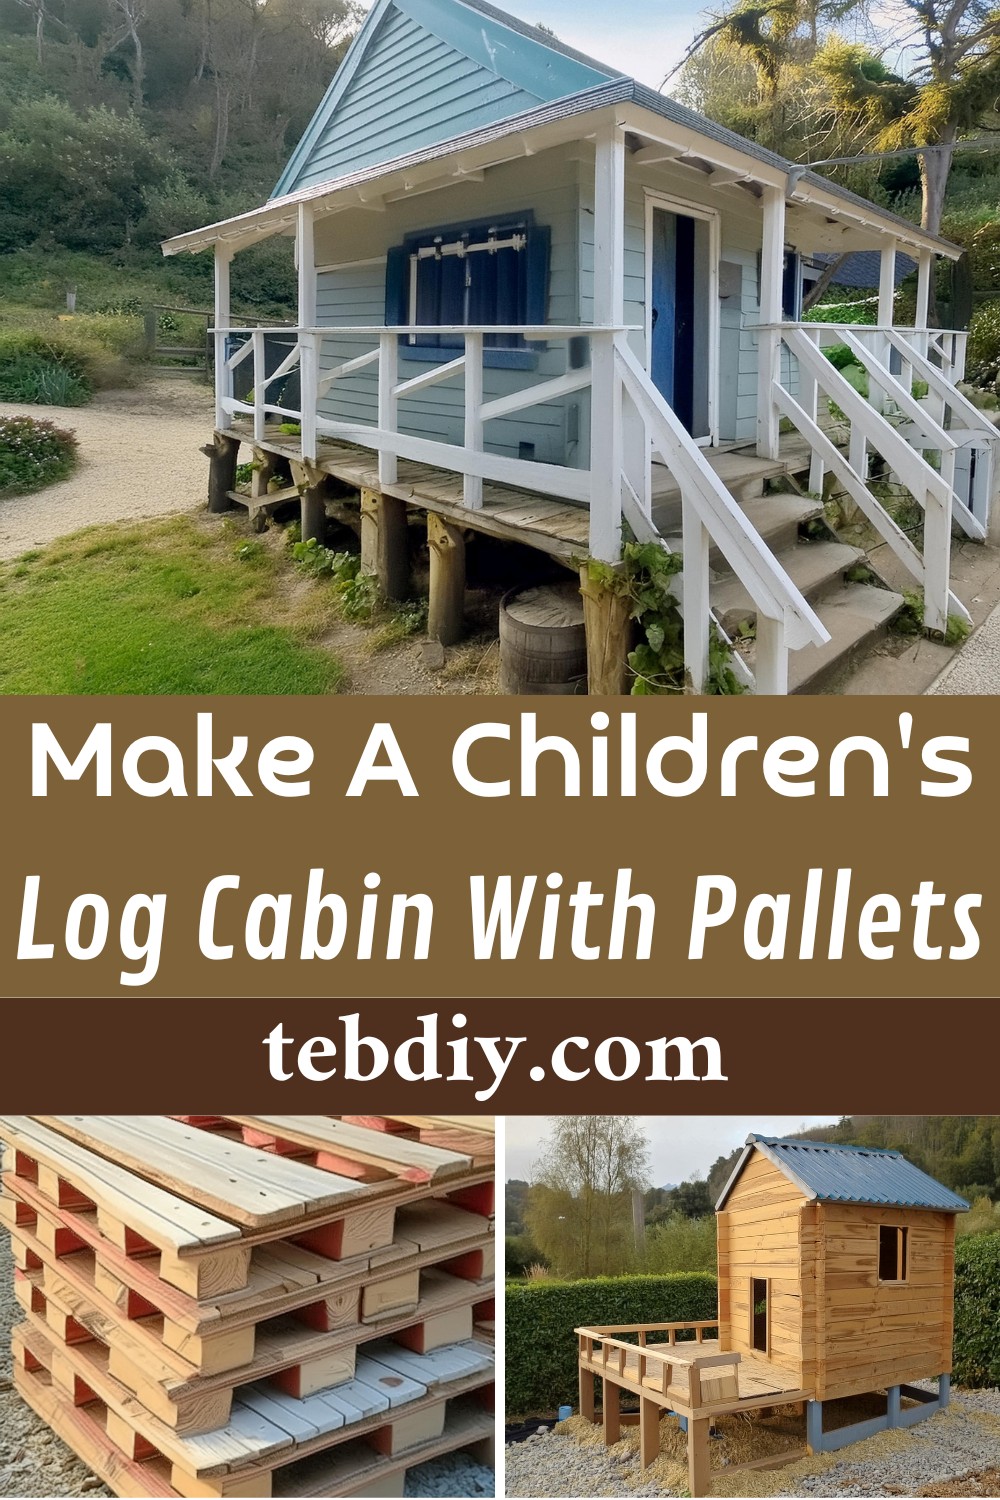 How To Make A Children's Log Cabin With Pallets